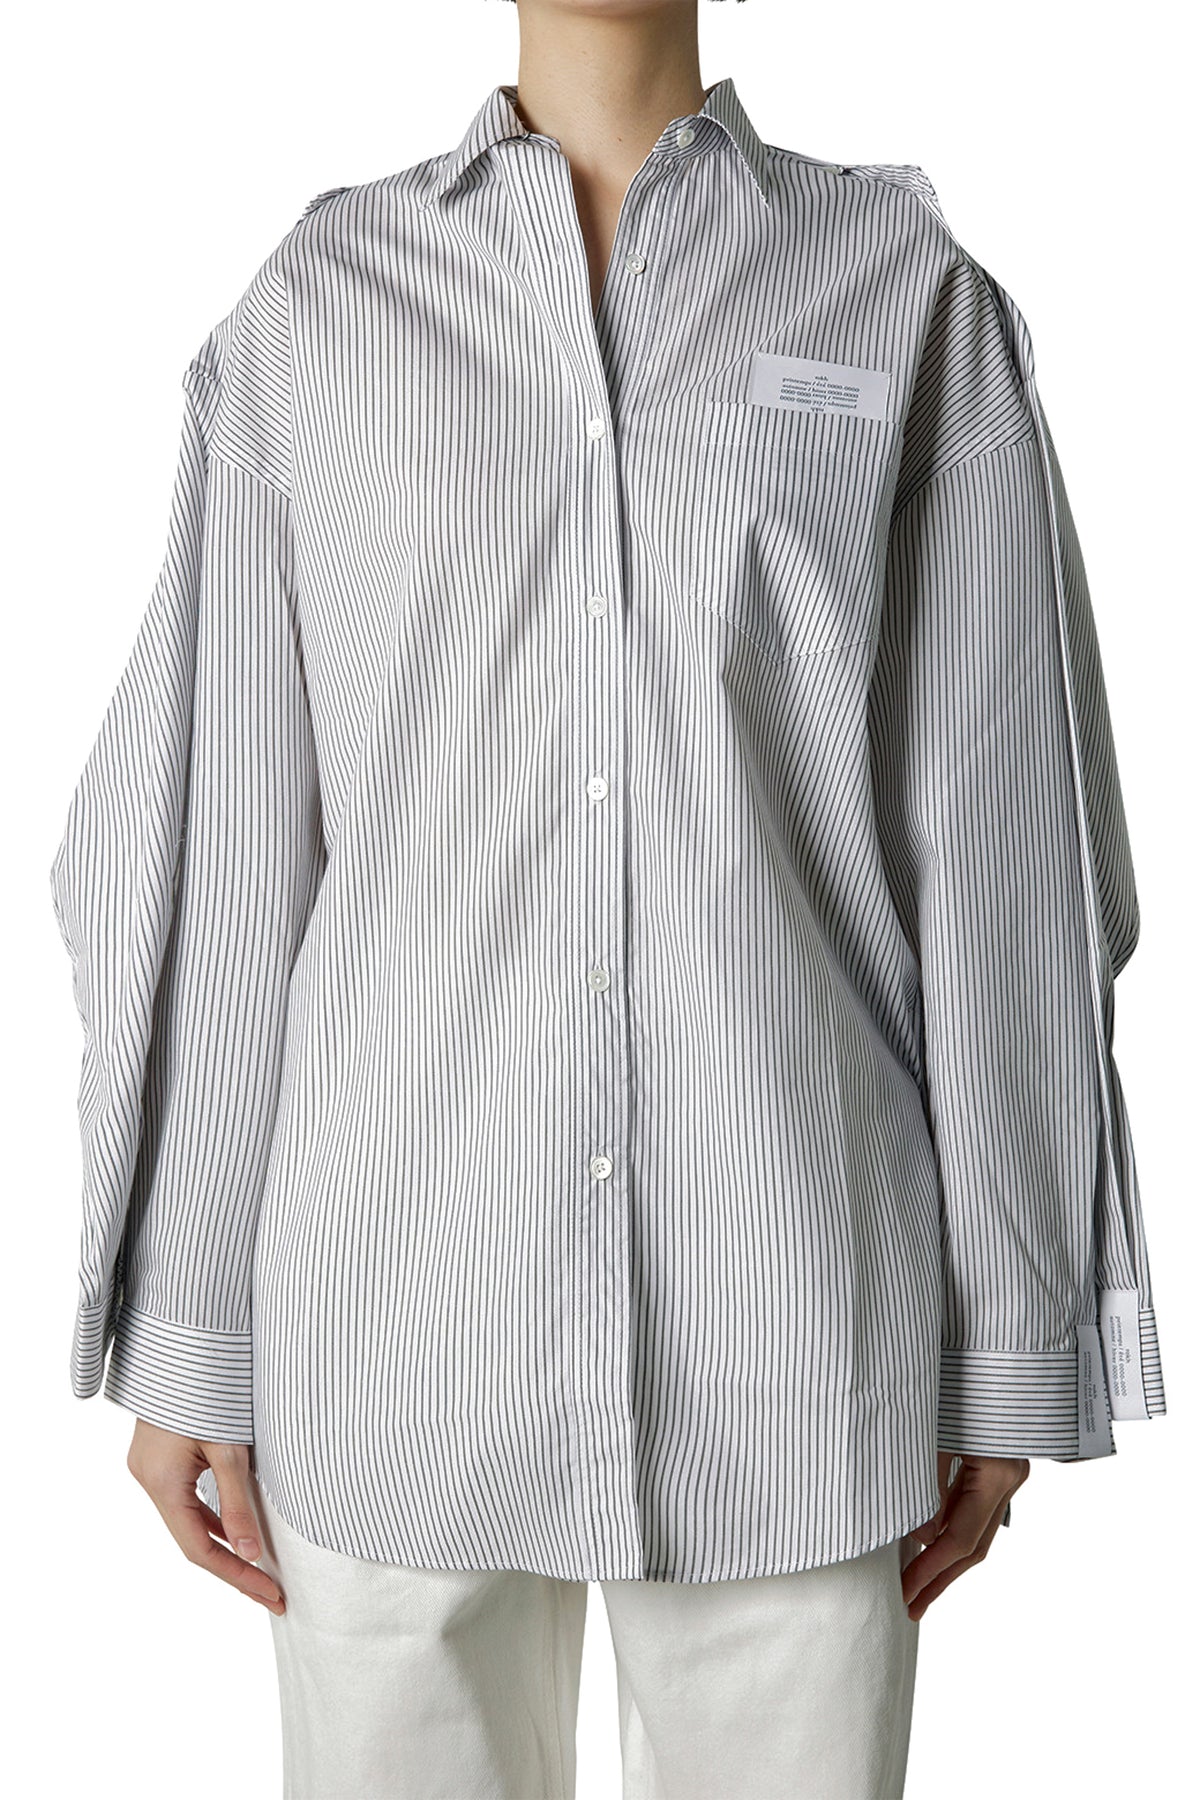 DOUBLE LAYERED SHIRTS - WHITE WITH GREY STRIPE / WHT